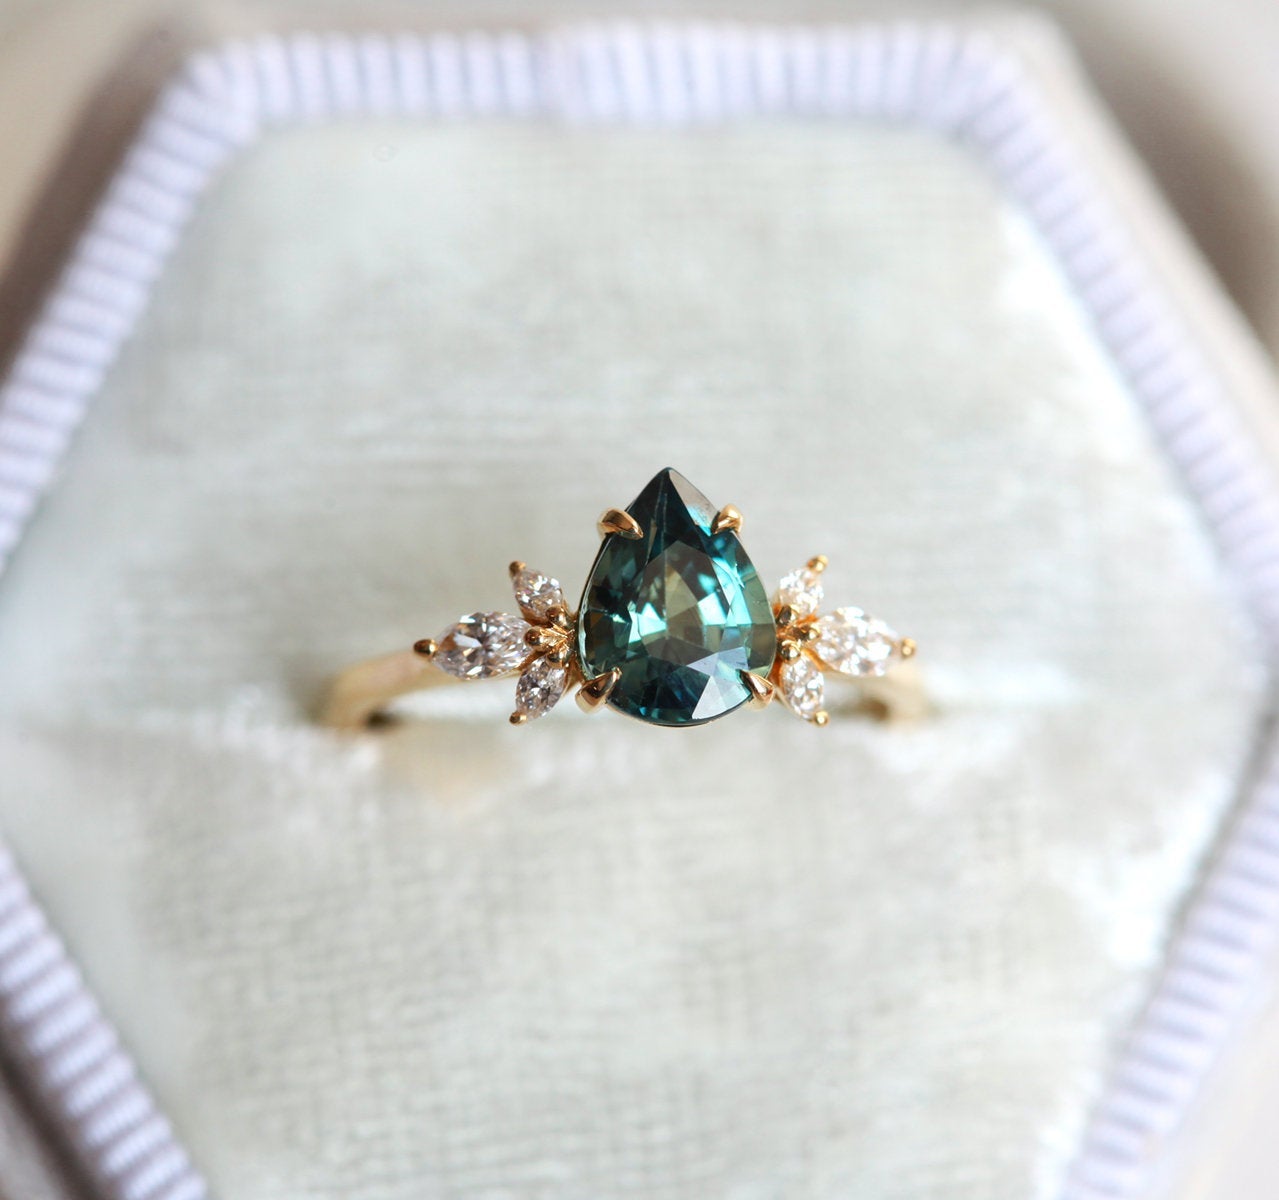 Pear-shaped teal sapphire ring with diamond cluster